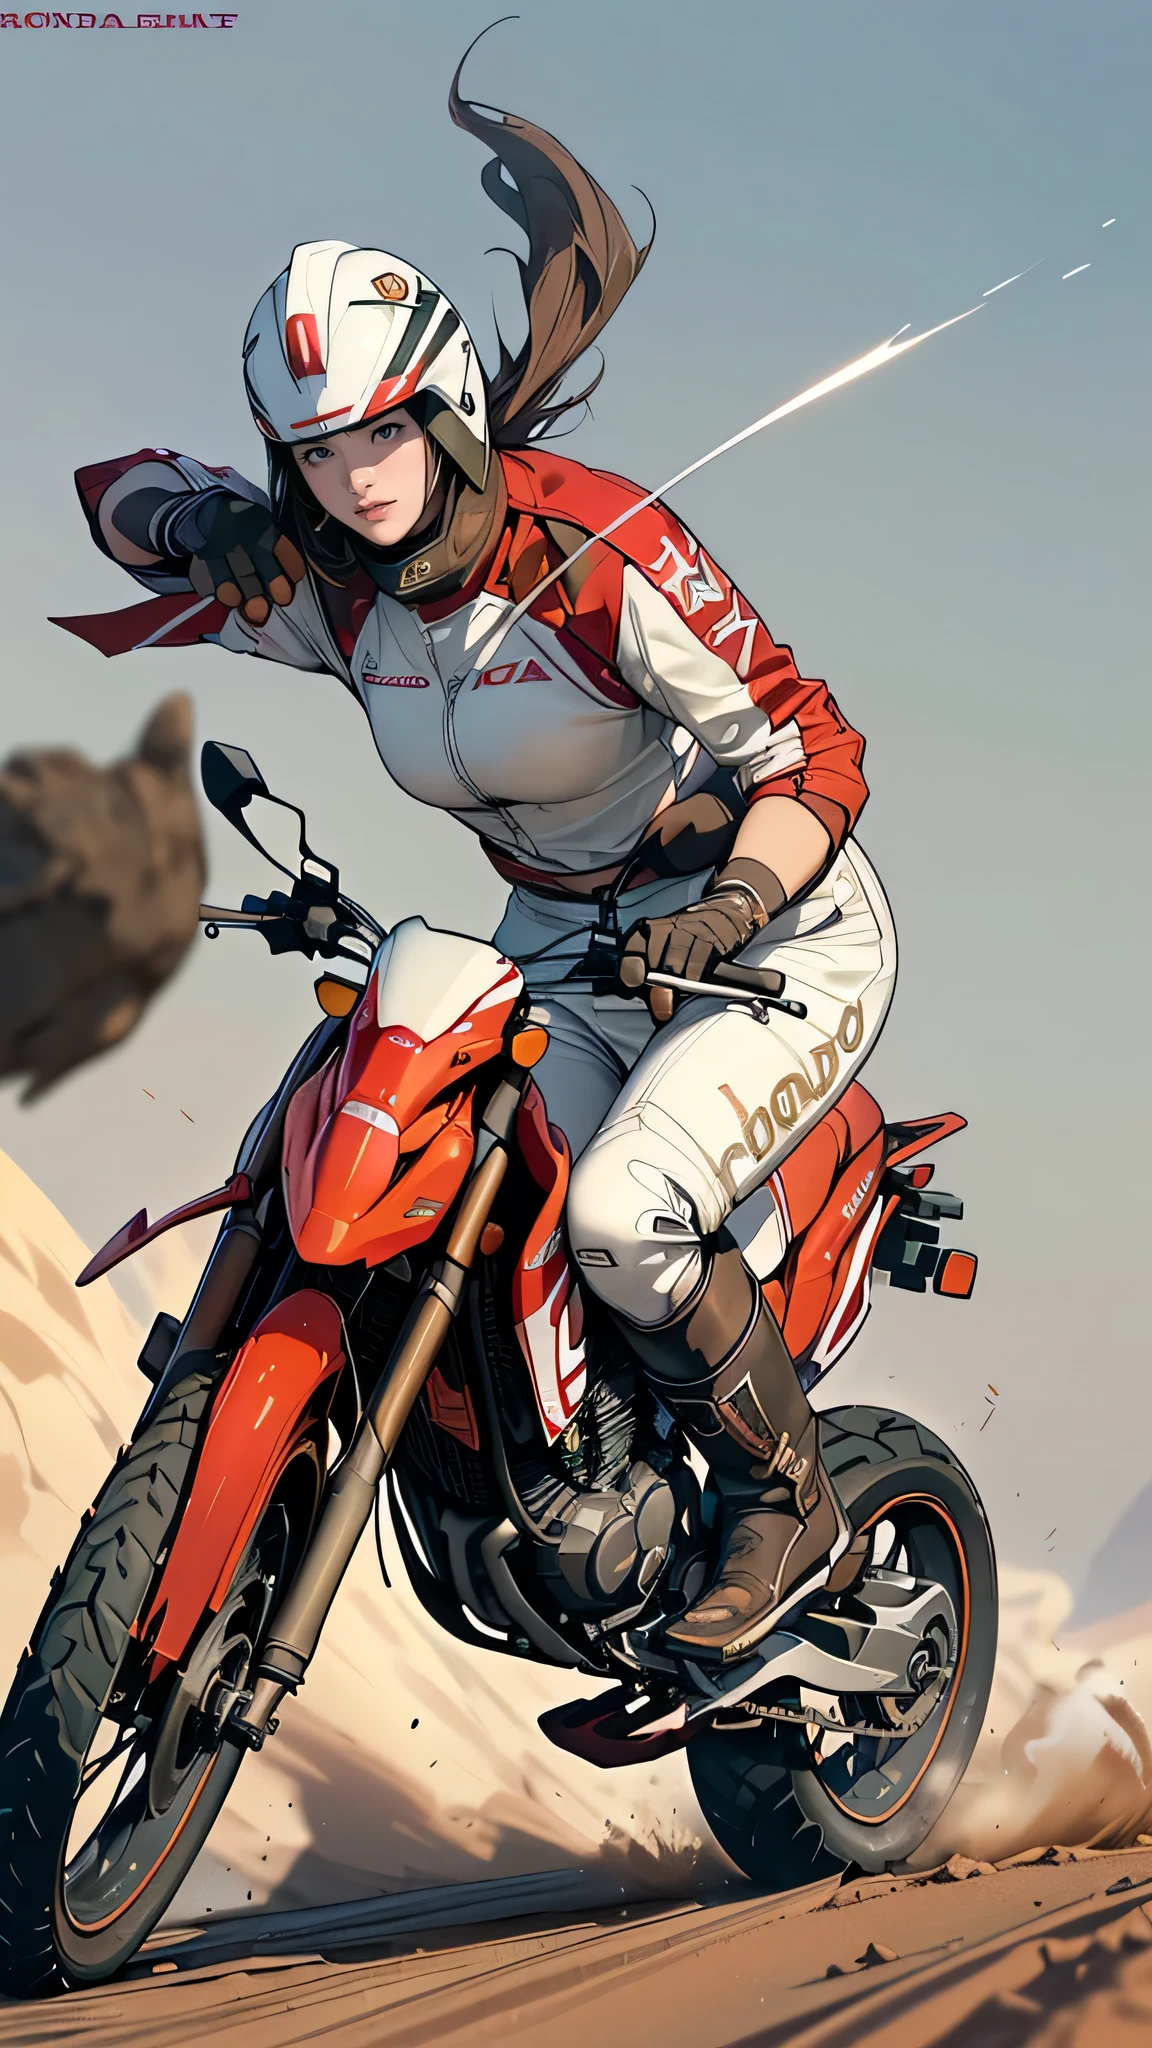 ((1 screen)), (((No logo))), Break Dynamic Angle, break (((riding a large Off-road motorcycle made by the HONDA company XLV750R,red and white:1.8))), Break Midsummer afternoon, ((The Sunshine, hot,Sweat:1.3)), break (((Military pattern high leg bikini:1.5))), break (Baja 1000 Race), (Altitude 3096m,Driving on dirt in Picacho del Diablo)), (((Firmly grasp the left and right handle grips))), break (highest quality,4K,8k,High resolution,masterpiece:1.2),Super detailed,(Realistic,photoRealistic,photo-Realistic:1.37), (perfect anatomy), (Perfect ratio of fingers to thumb), (Symmetrical face), break (Beautiful young woman rider(Simple Helmet, Gloves,boots:1.5)), break (8 heads,Beautiful body line), (Medium breast,Beautiful valley), (Flat stomach), (Small waist), (Beautiful big ass), break ((Expressing a sense of speed:1.5)), ((Expressing the feeling of sprinting)), (((Sprint,walking fast,Explosive,Pleasure))), (Driving on dirt) (((Flying sand and intense dust))), break (((A smile comes to mind))), (((I&#39;m so happy I can&#39;t help but laugh))), (((Here we go!!How about it!!))) break ((HONDA XLV750R: Car height,High seat height,Big body)) break